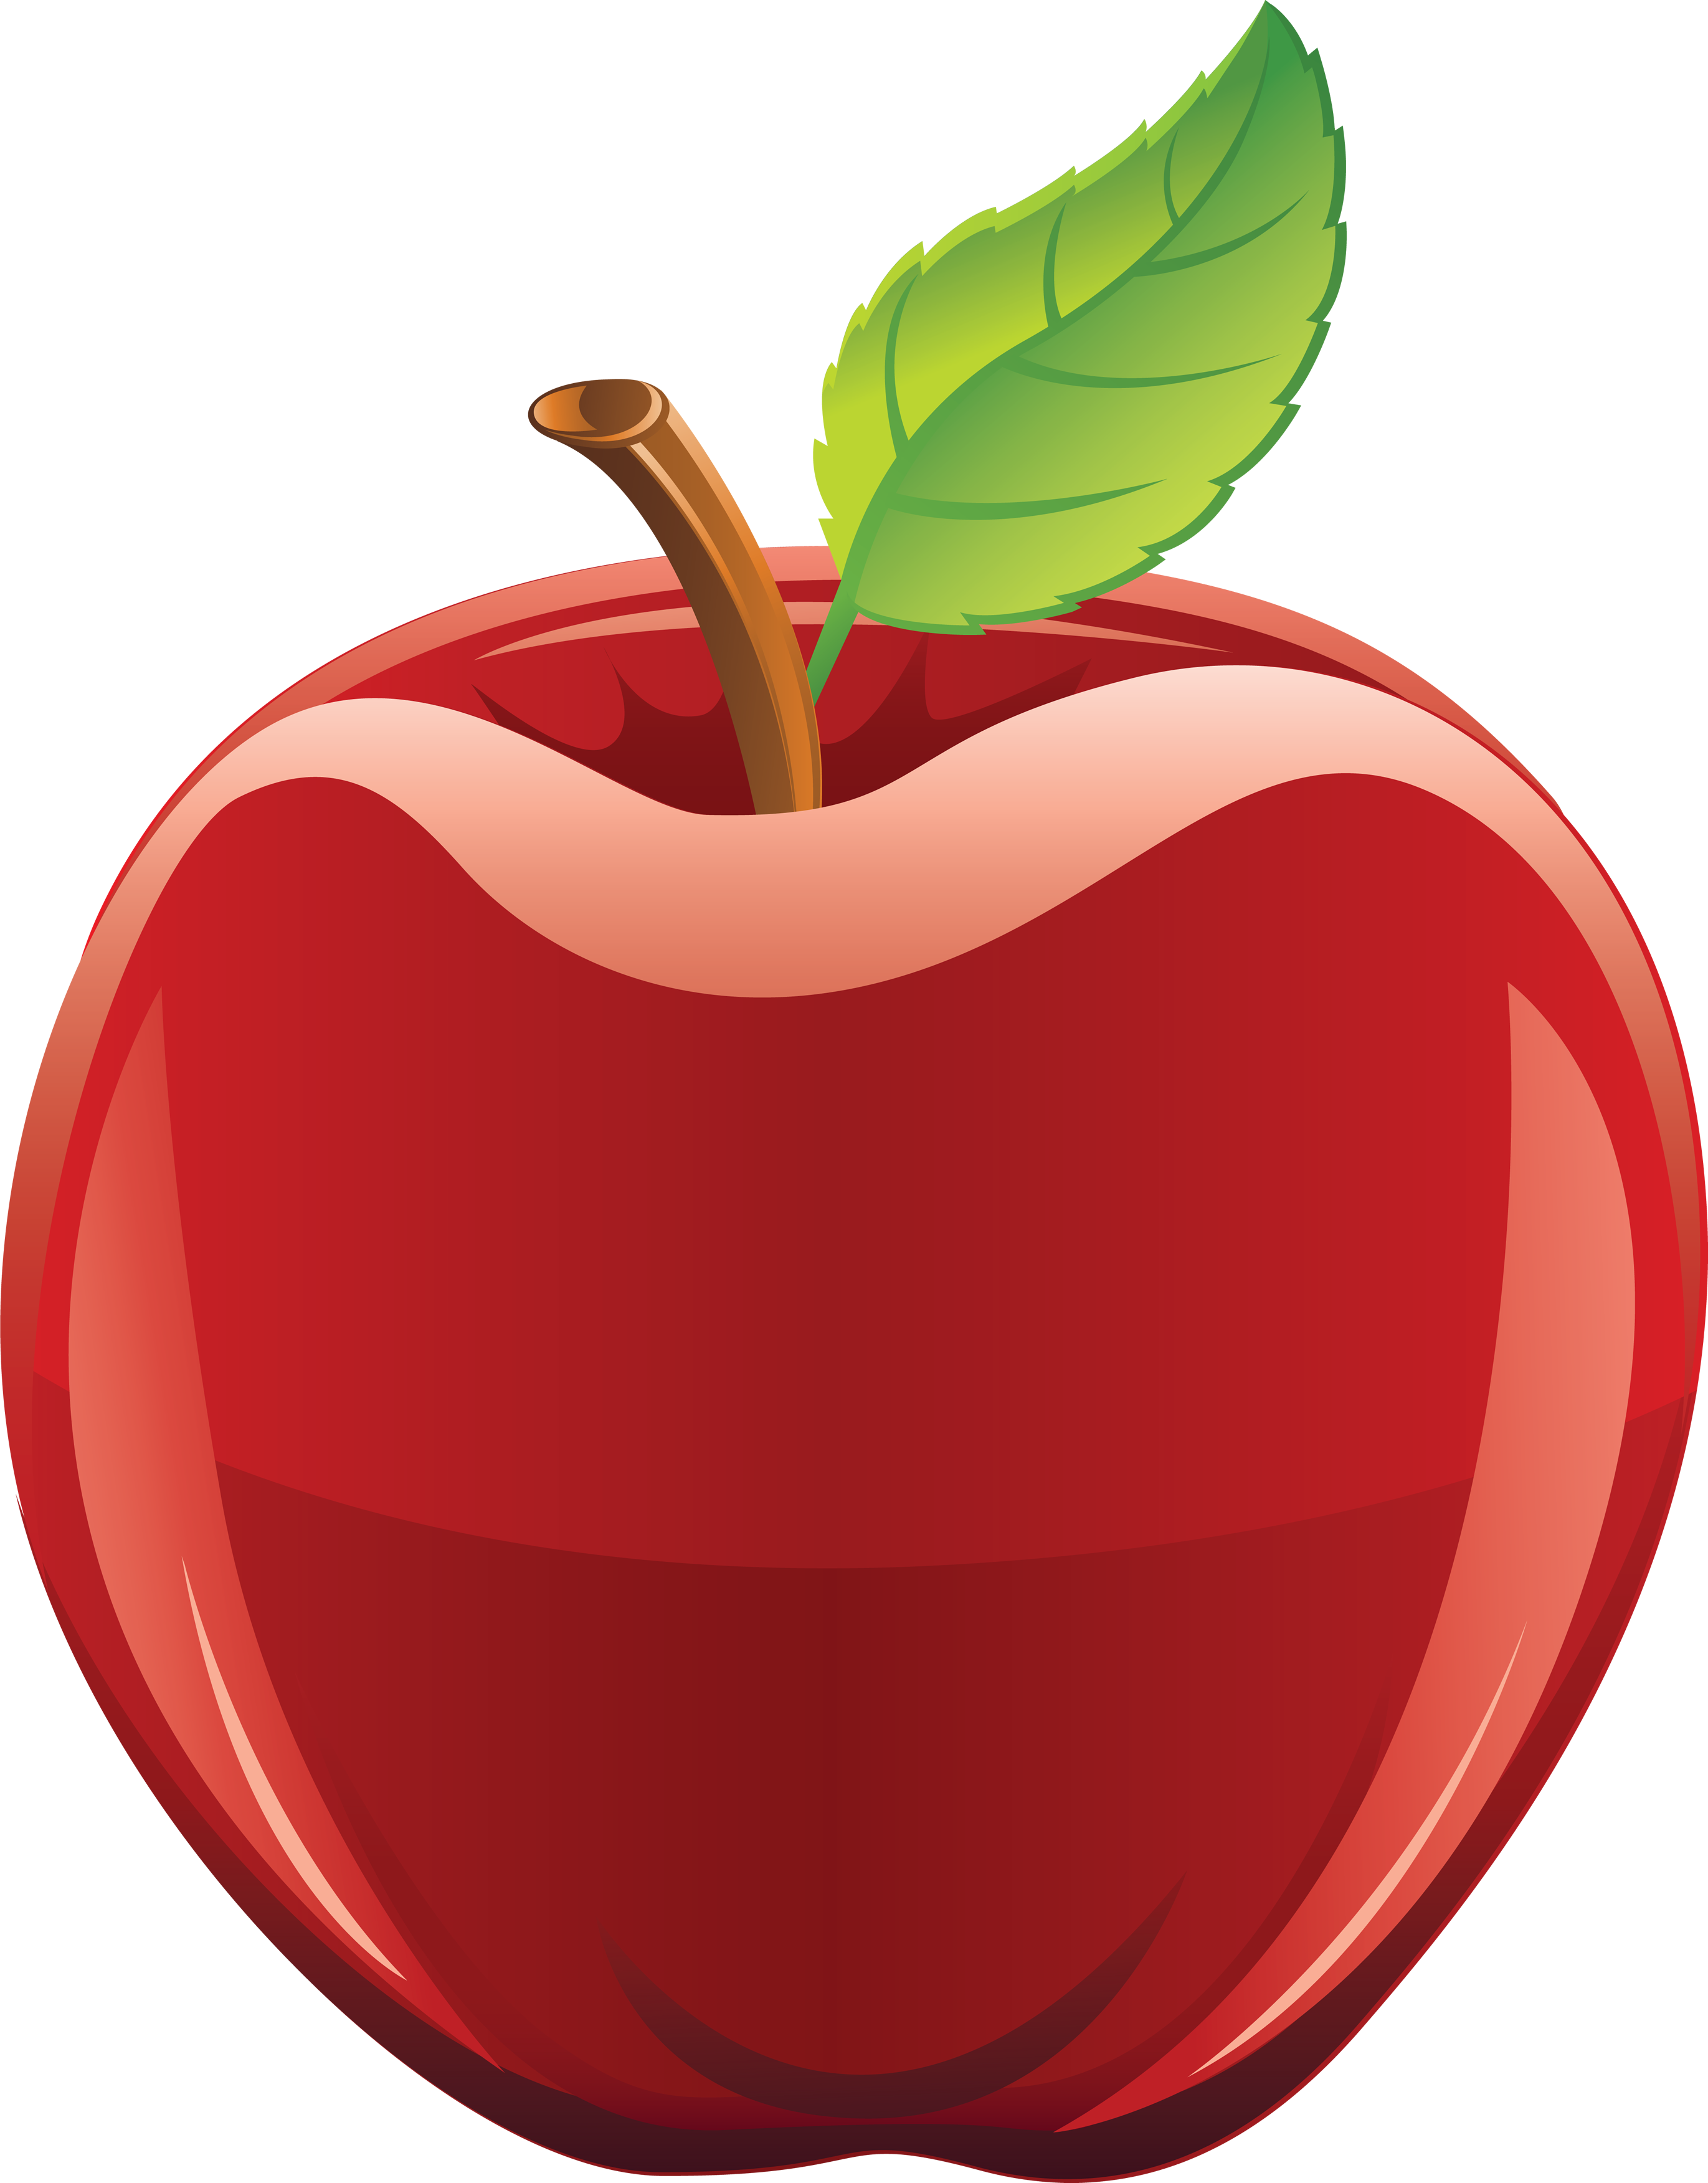 Red apple logos or banner clipart